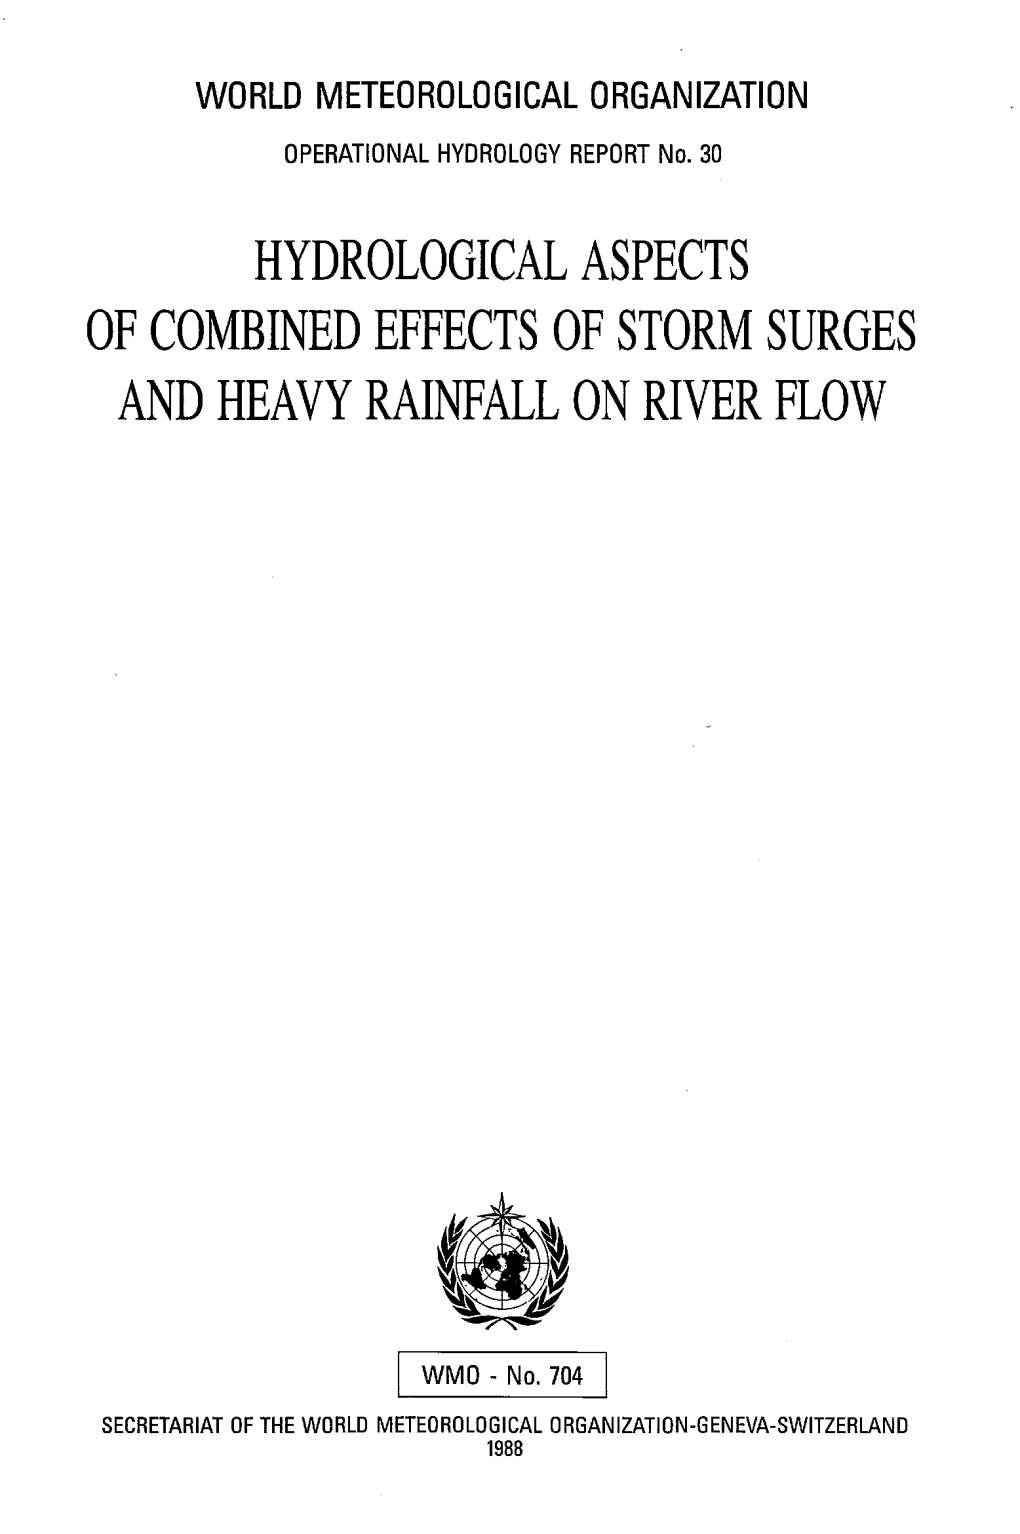 Hydrological Aspects of Combined Effects of Storm Surges and Heavy Rainfall on River Flow